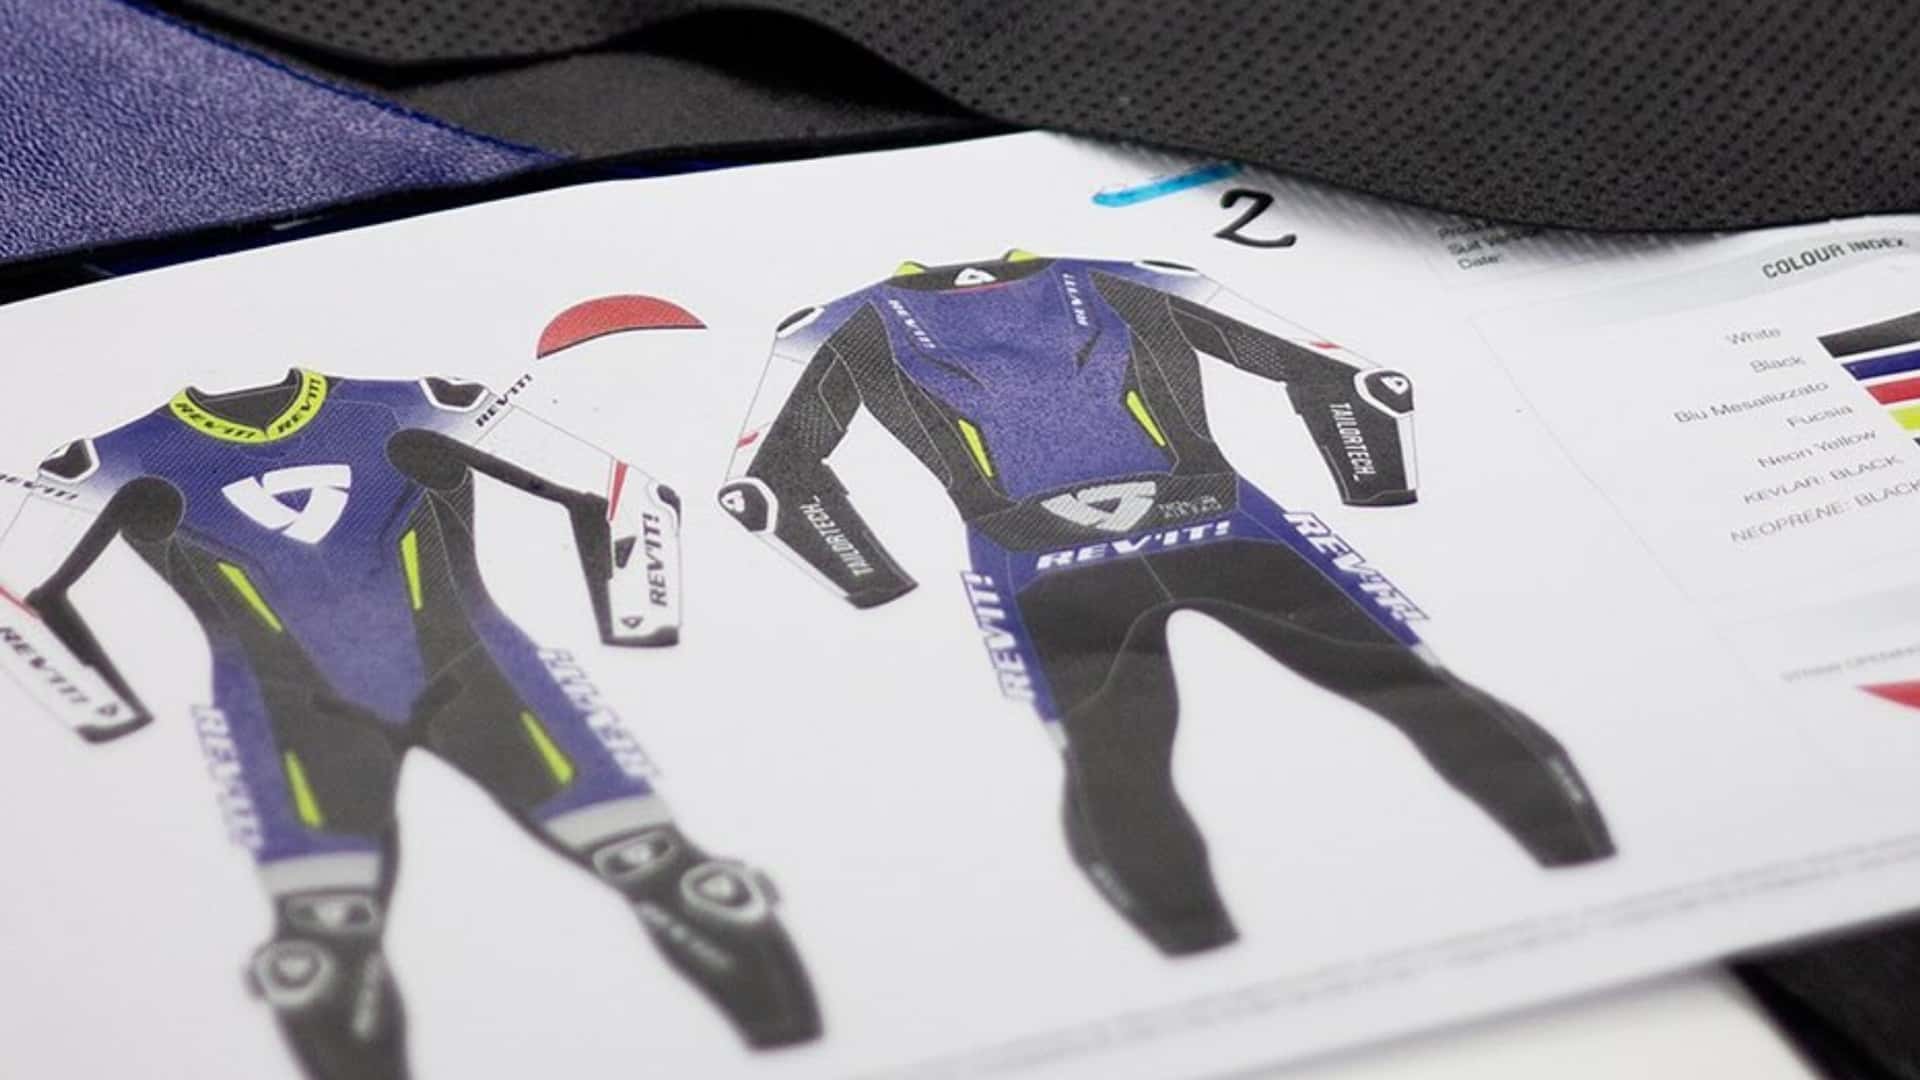 you can win your own custom race suit in rev’it!’s design contest